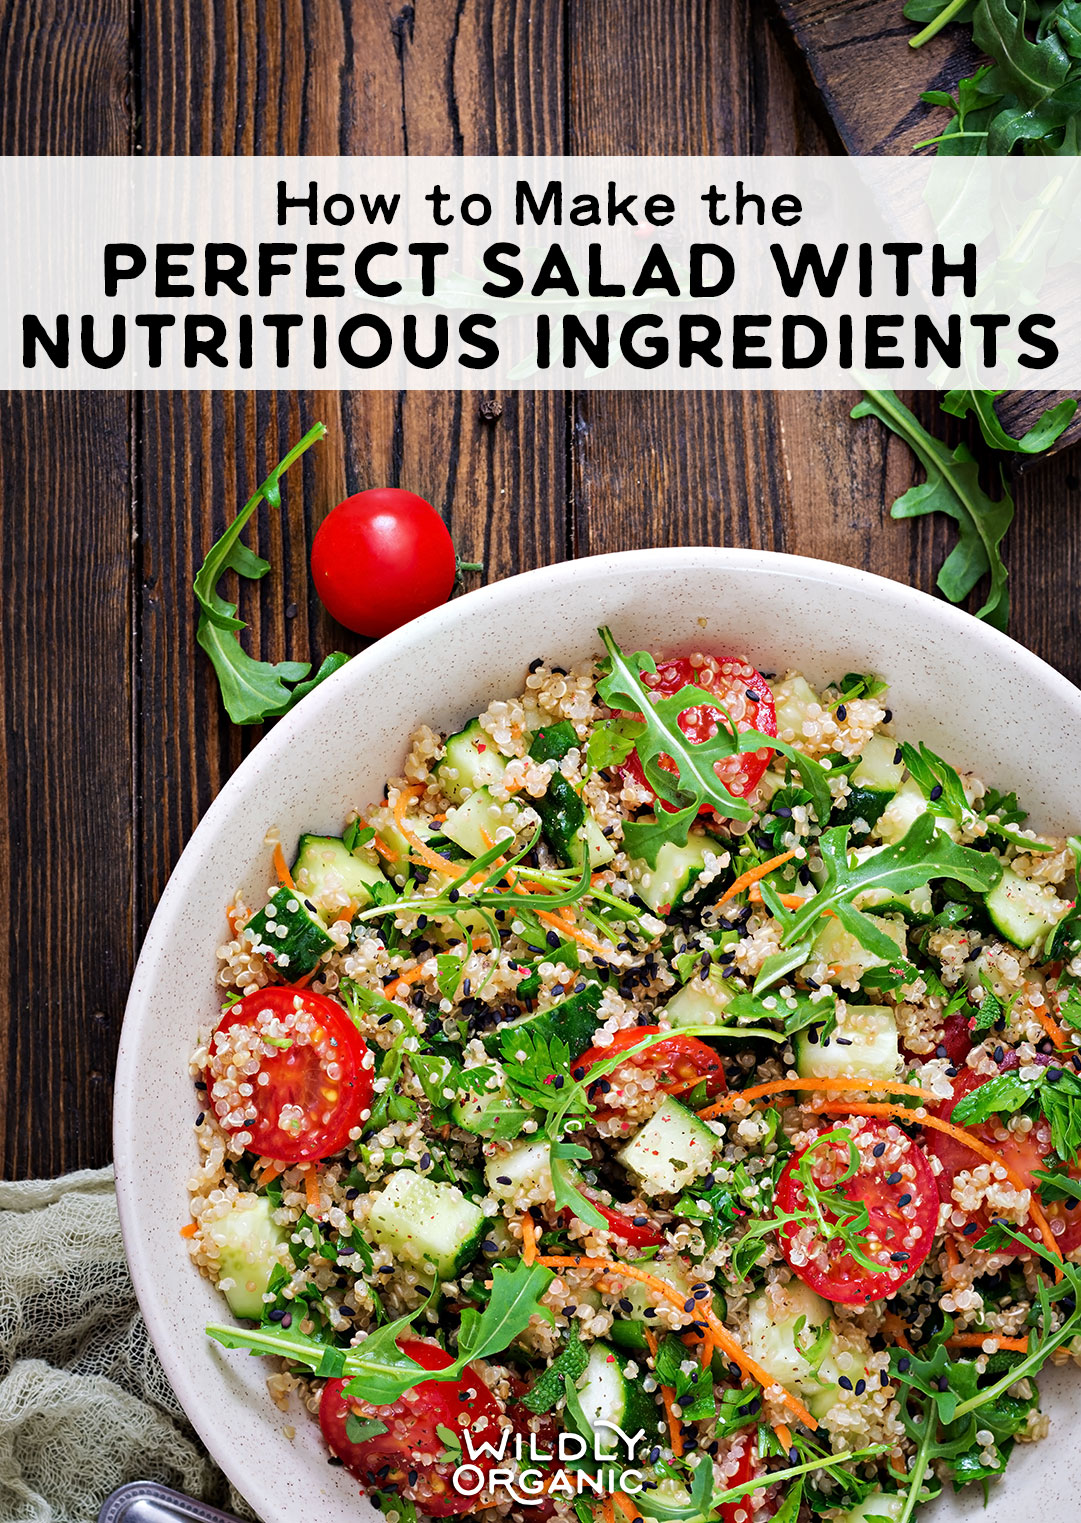 Photo of quinoa salad | How to Make the Perfect Salad with Nutritious Ingredients | Ever wonder how to make the perfect salad with nutritious ingredients? It's not as hard as you may think. Here are some tips to get you started!